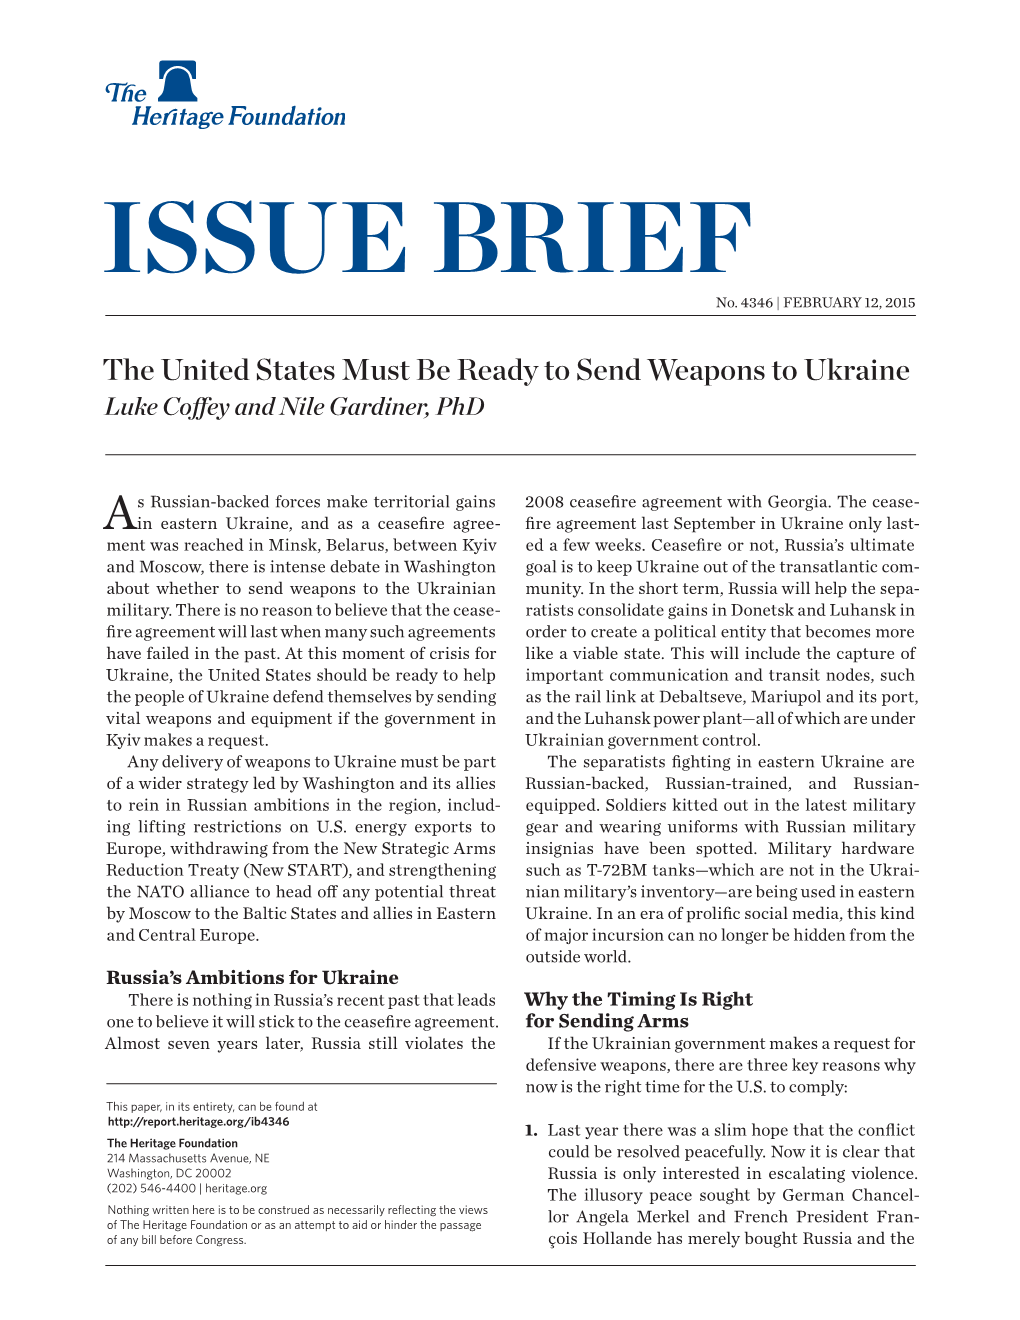 U.S. Must Be Ready to Send Weapons to Ukraine